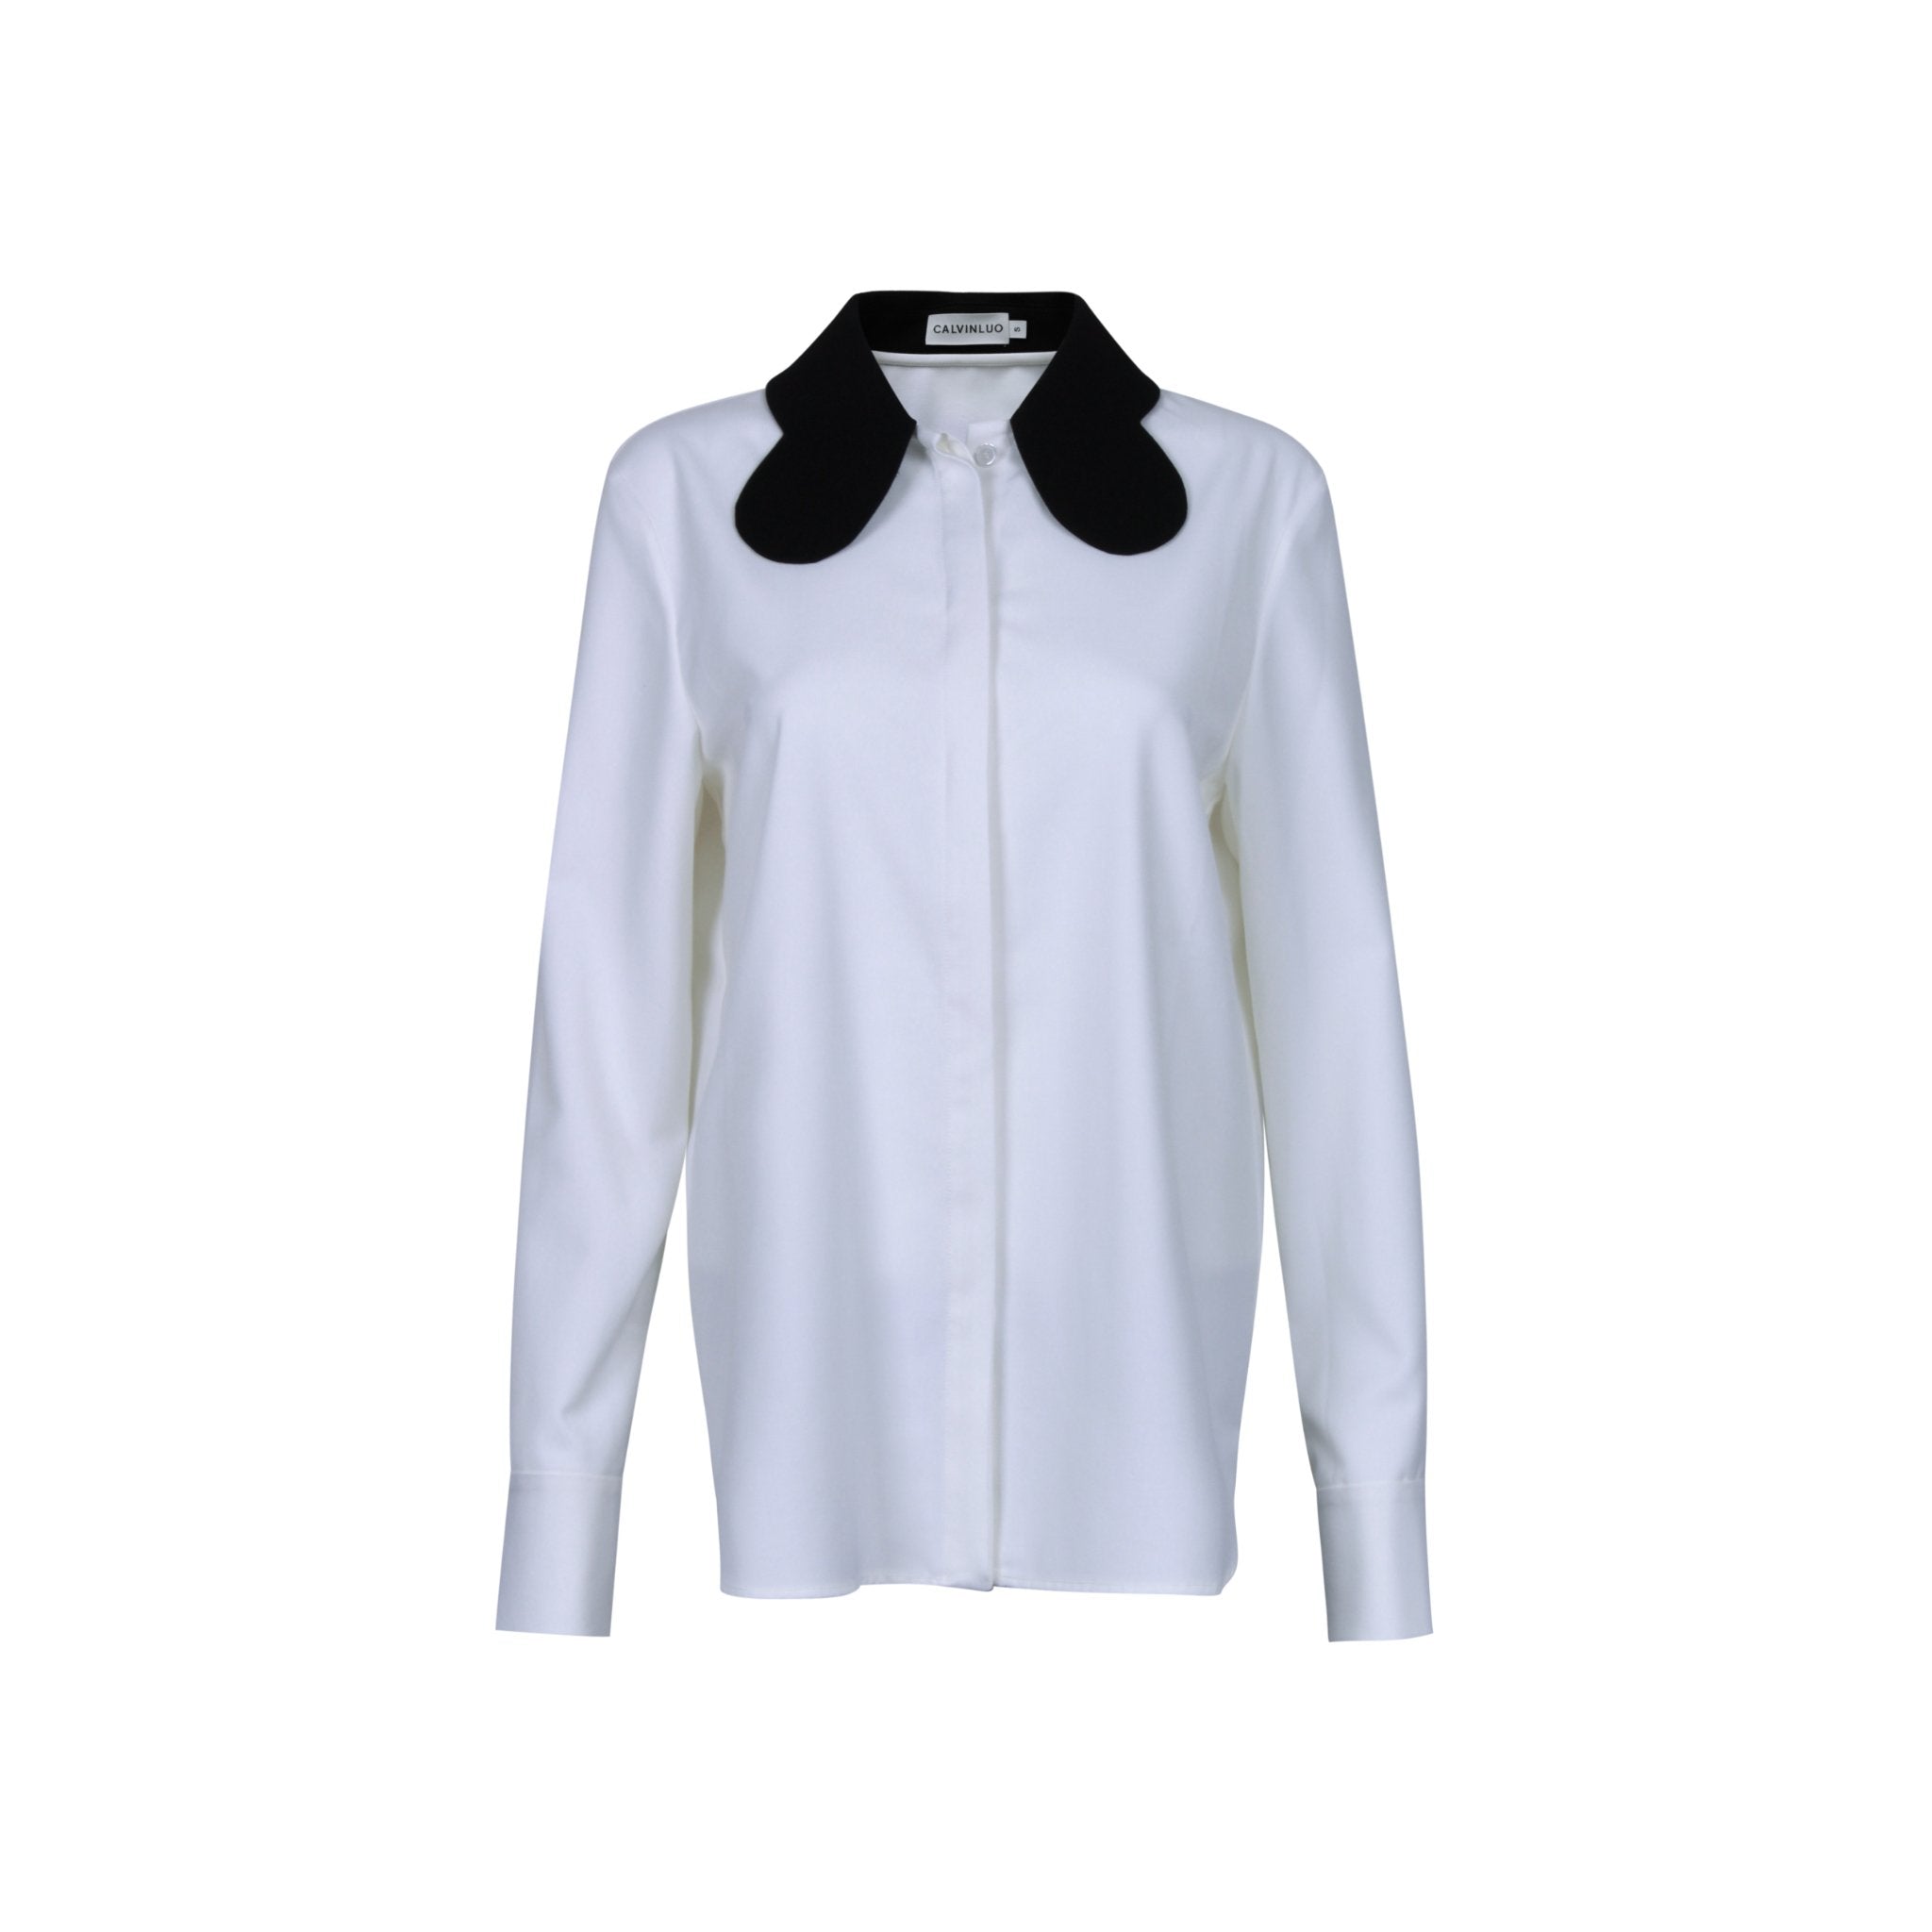 CALVIN LUO White Shirt with Black Butterfly Collar | MADA IN CHINA